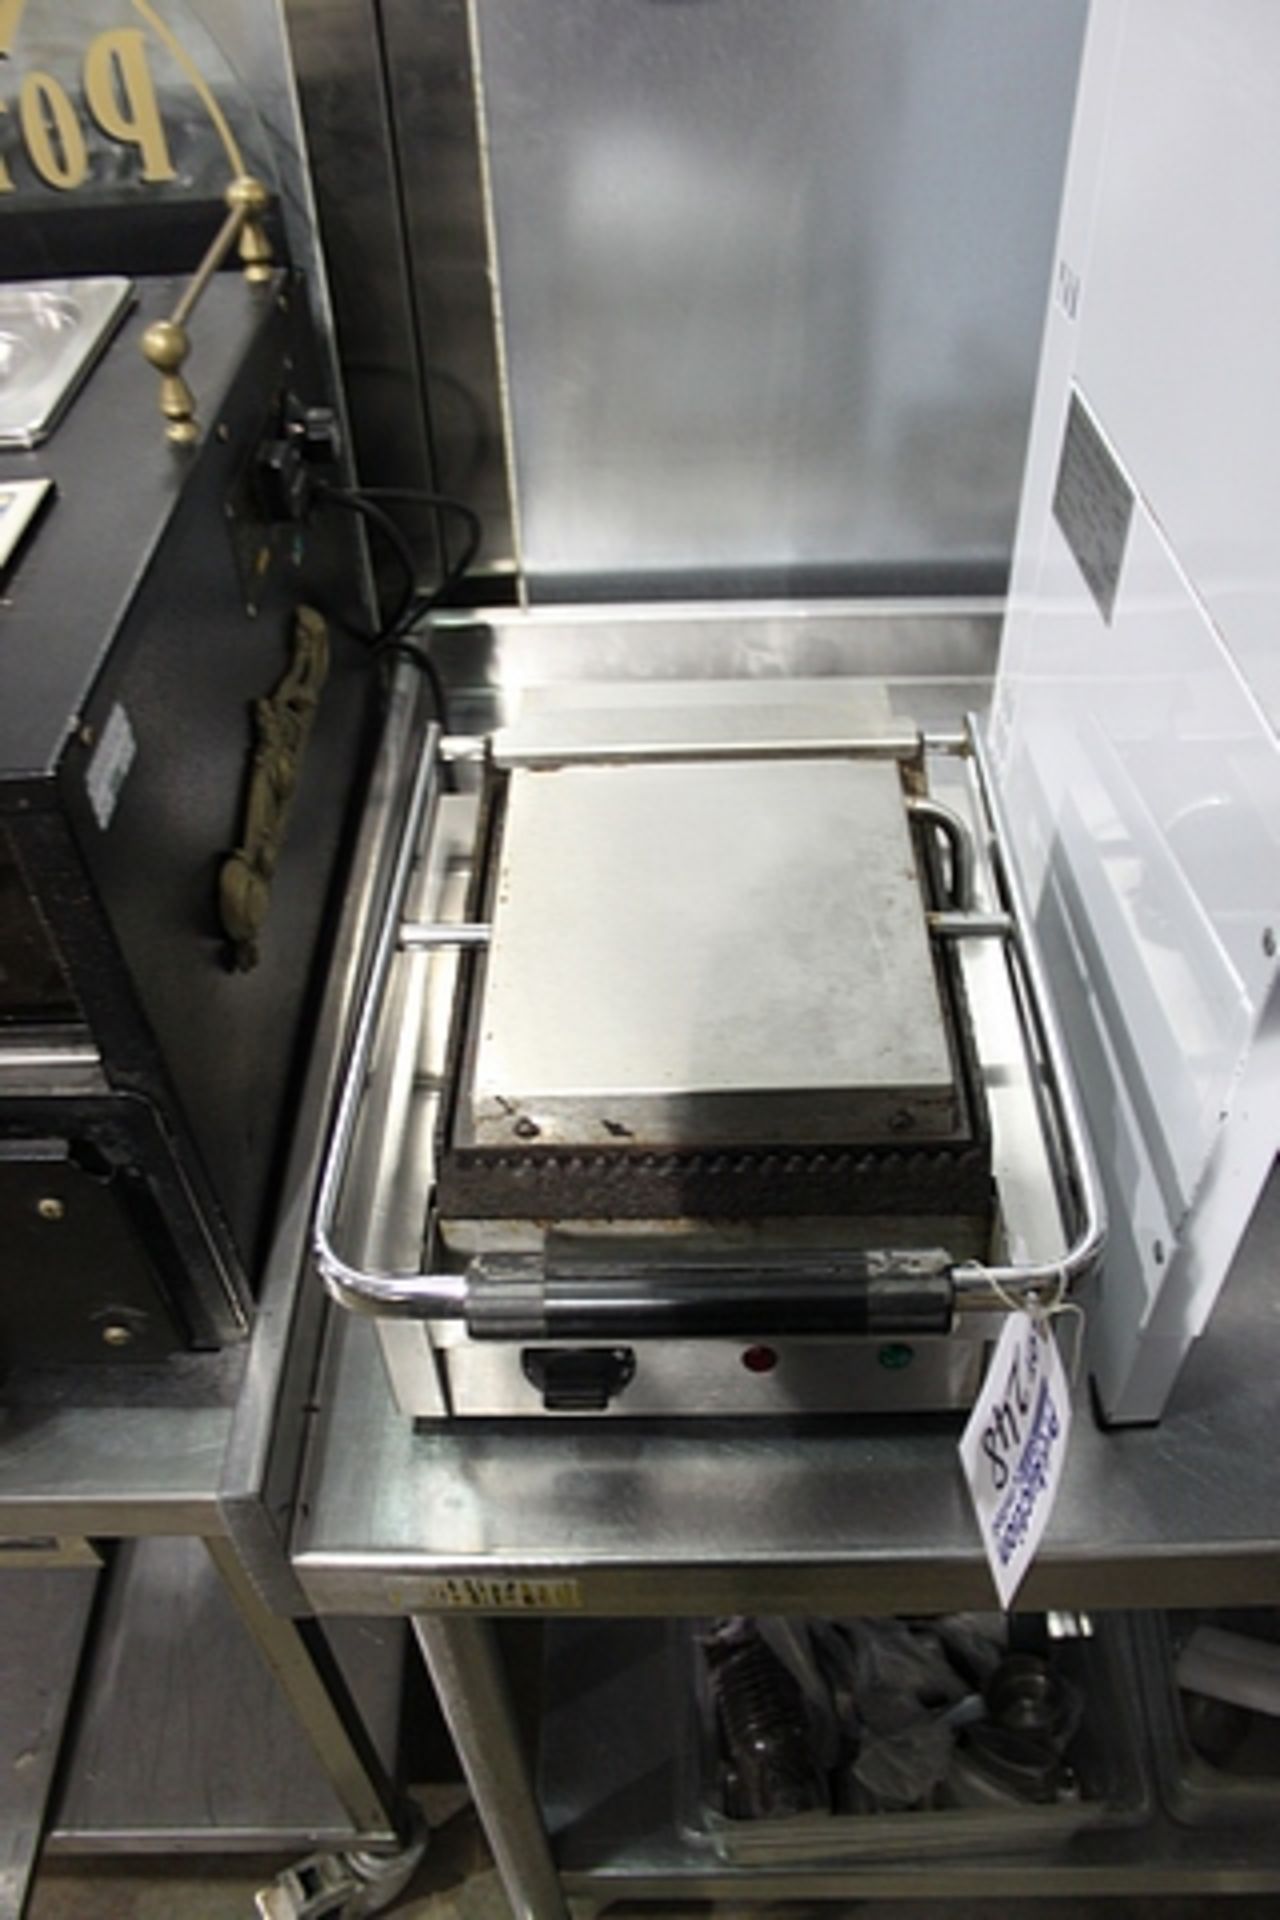 Apollo ABC GS contact grill 1500W ribbed plates